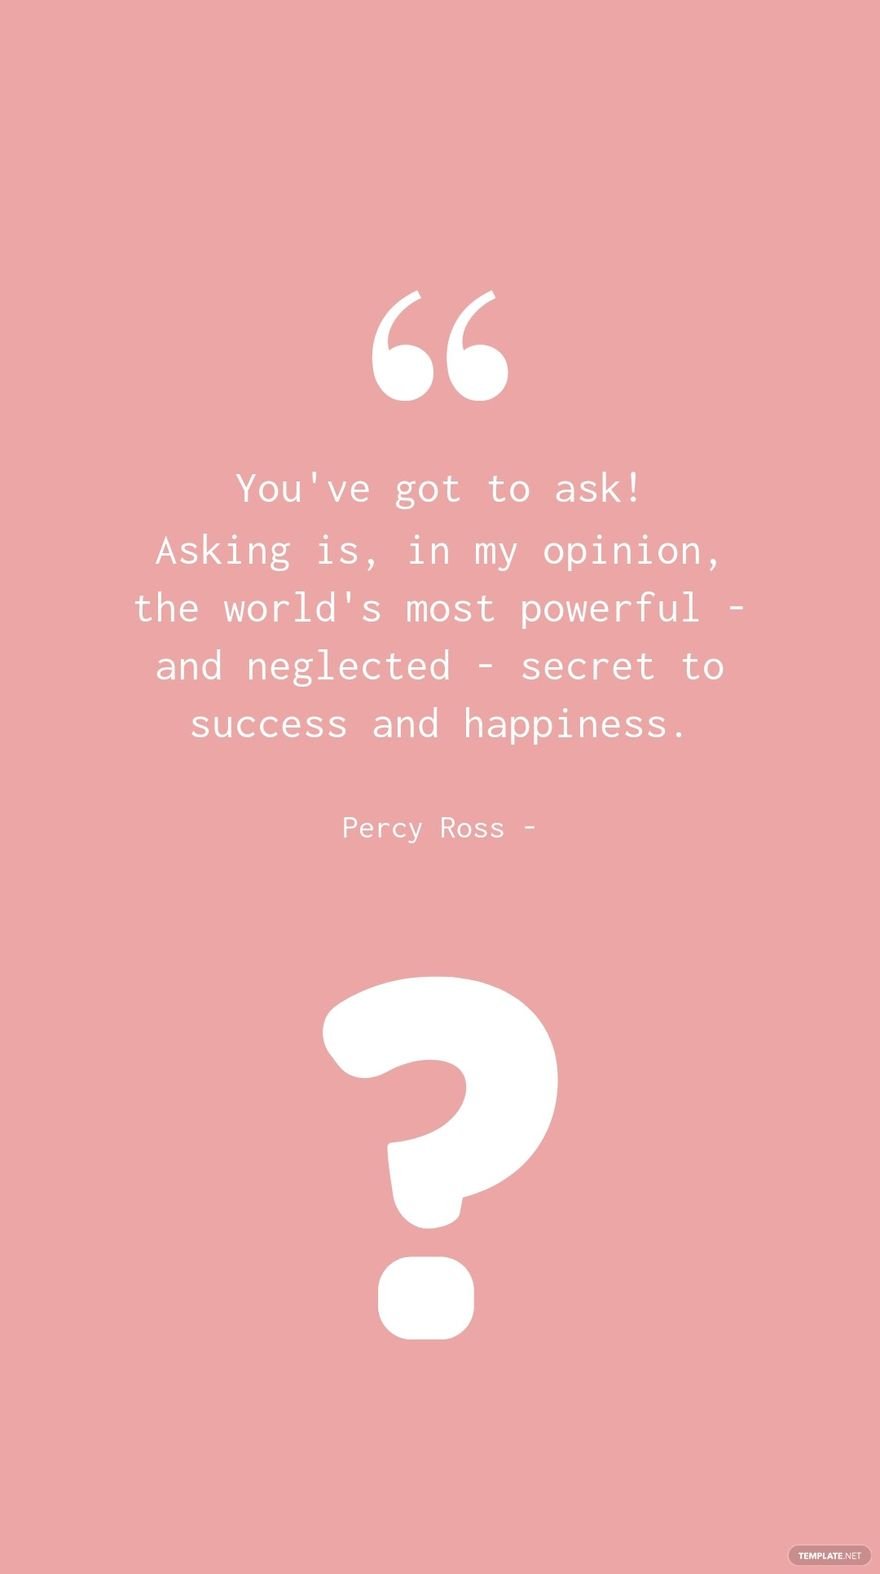 Percy Ross - You've got to ask! Asking is, in my opinion, the world's most powerful - and neglected - secret to success and happiness.